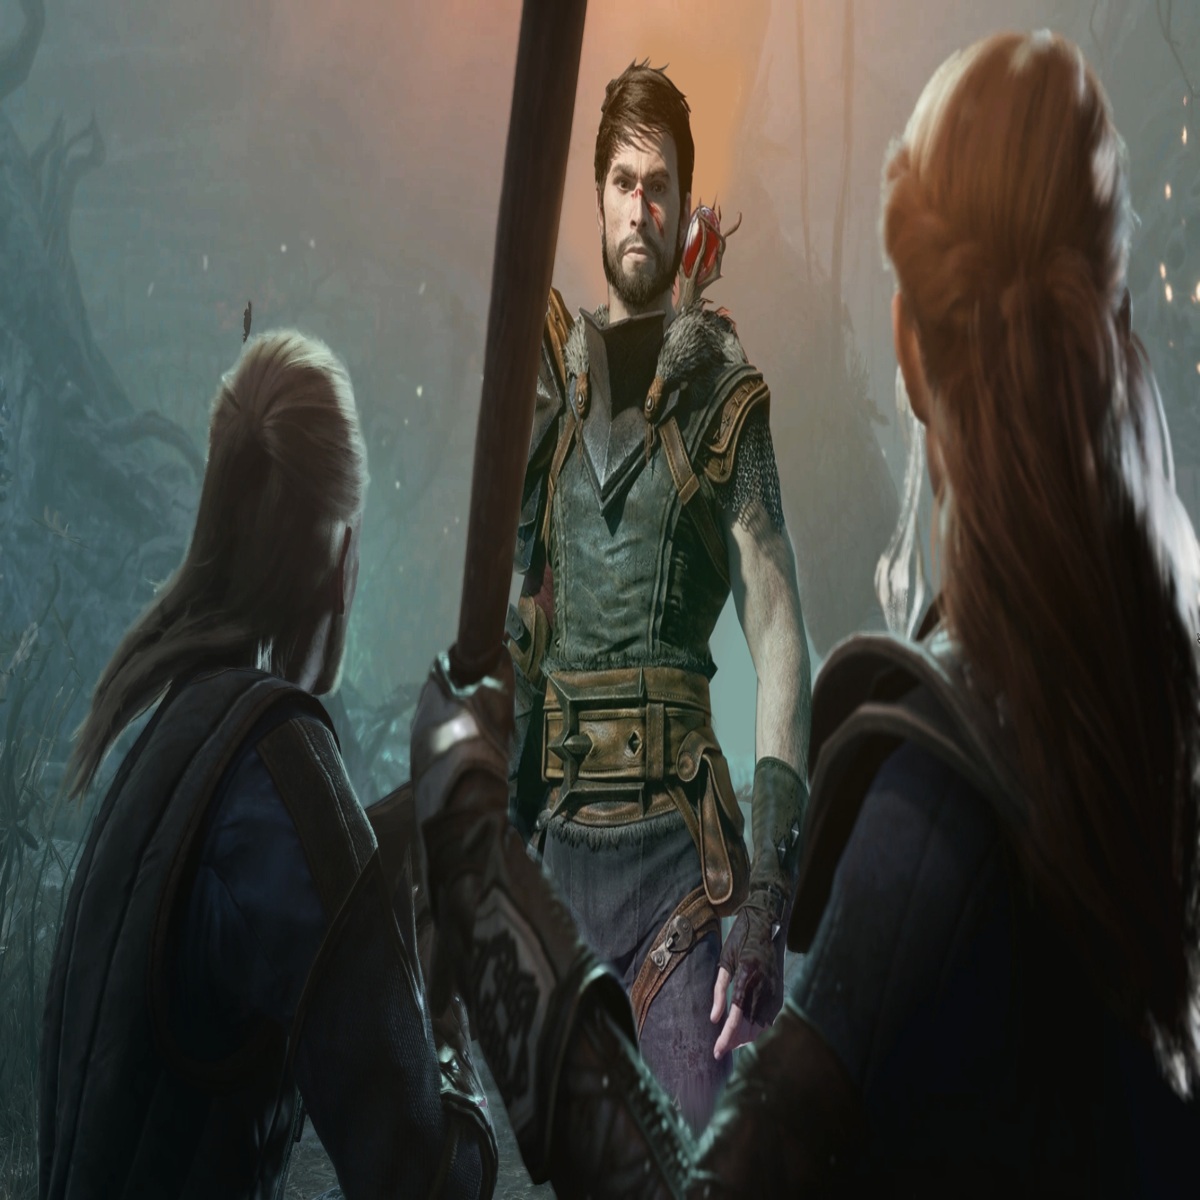 Dragon Age Dreadwolf: 4 Companions We Expect to See Again